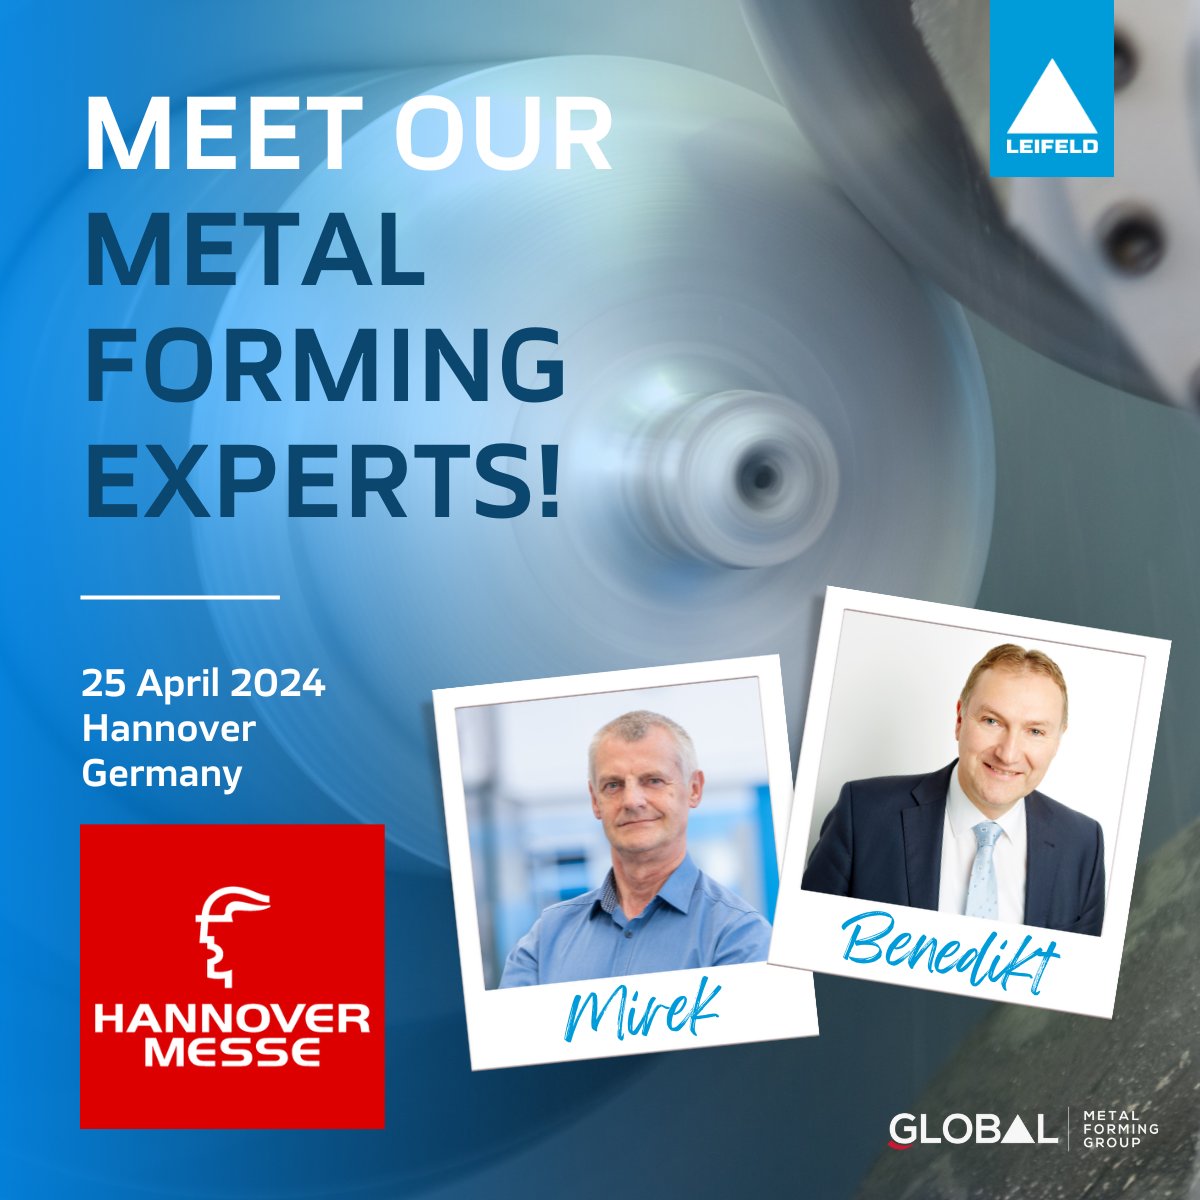 Catch our metal forming specialists, Nillies Benedikt and Mirek Nawa, at HANNOVER MESSE on April 25th! Dive into the latest innovations in machine building for aluminum cylinder production. Contact us: leifeldms.com/en/contact.html